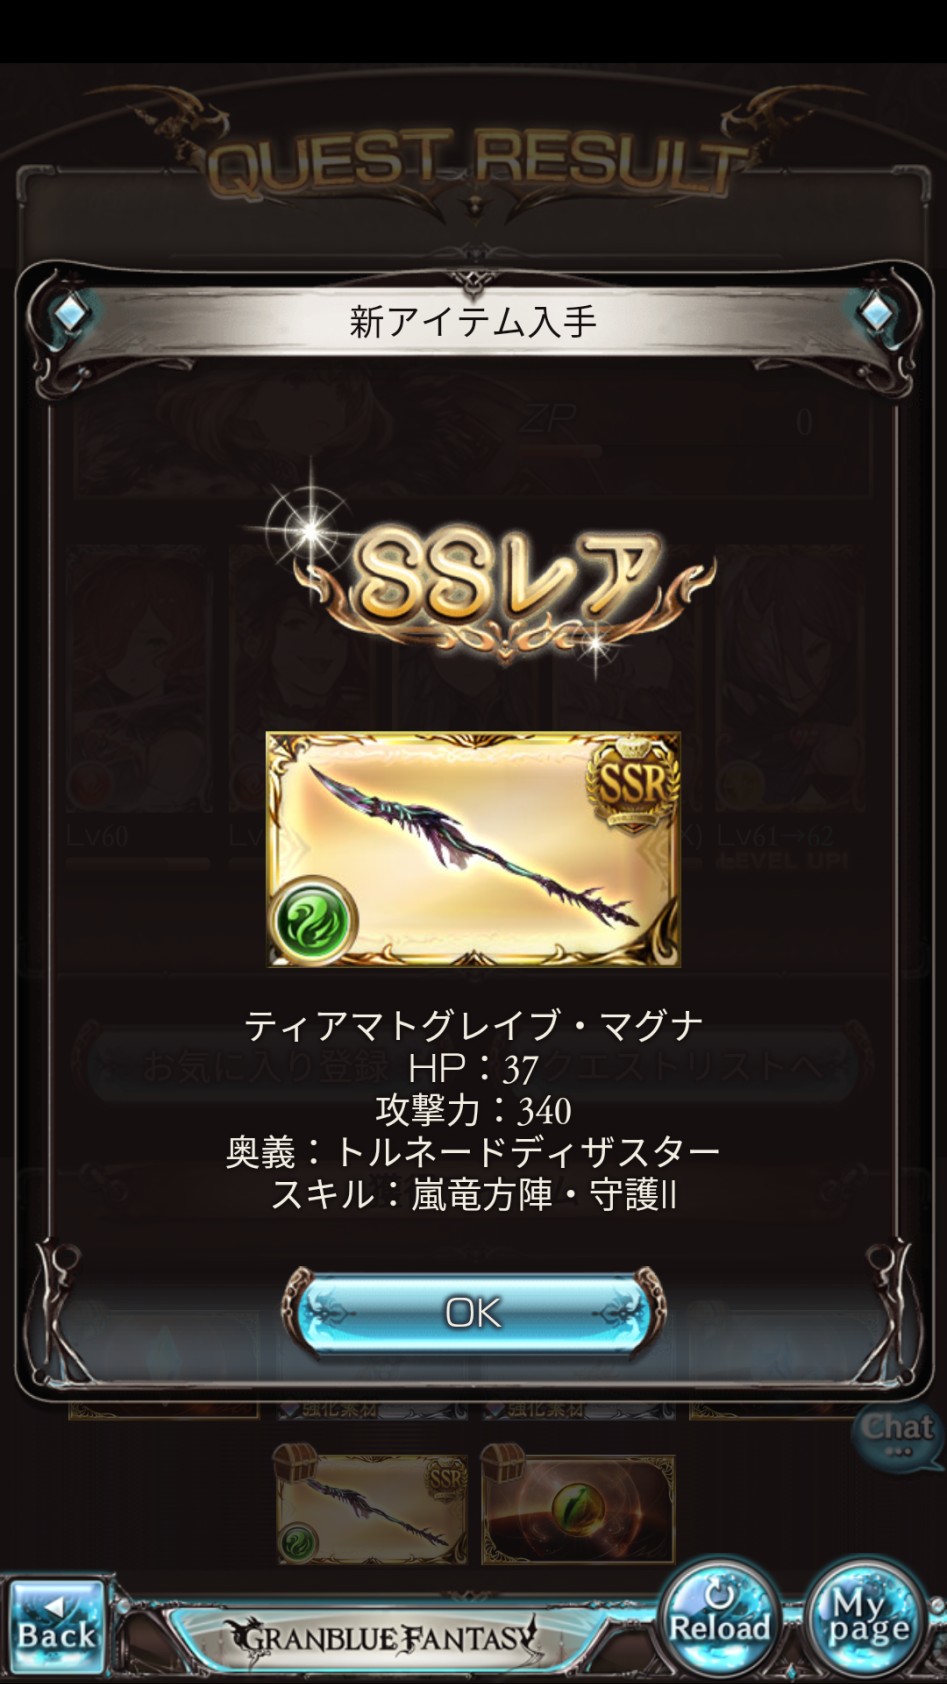 Granblue_2017-03-06-01-08-22.png